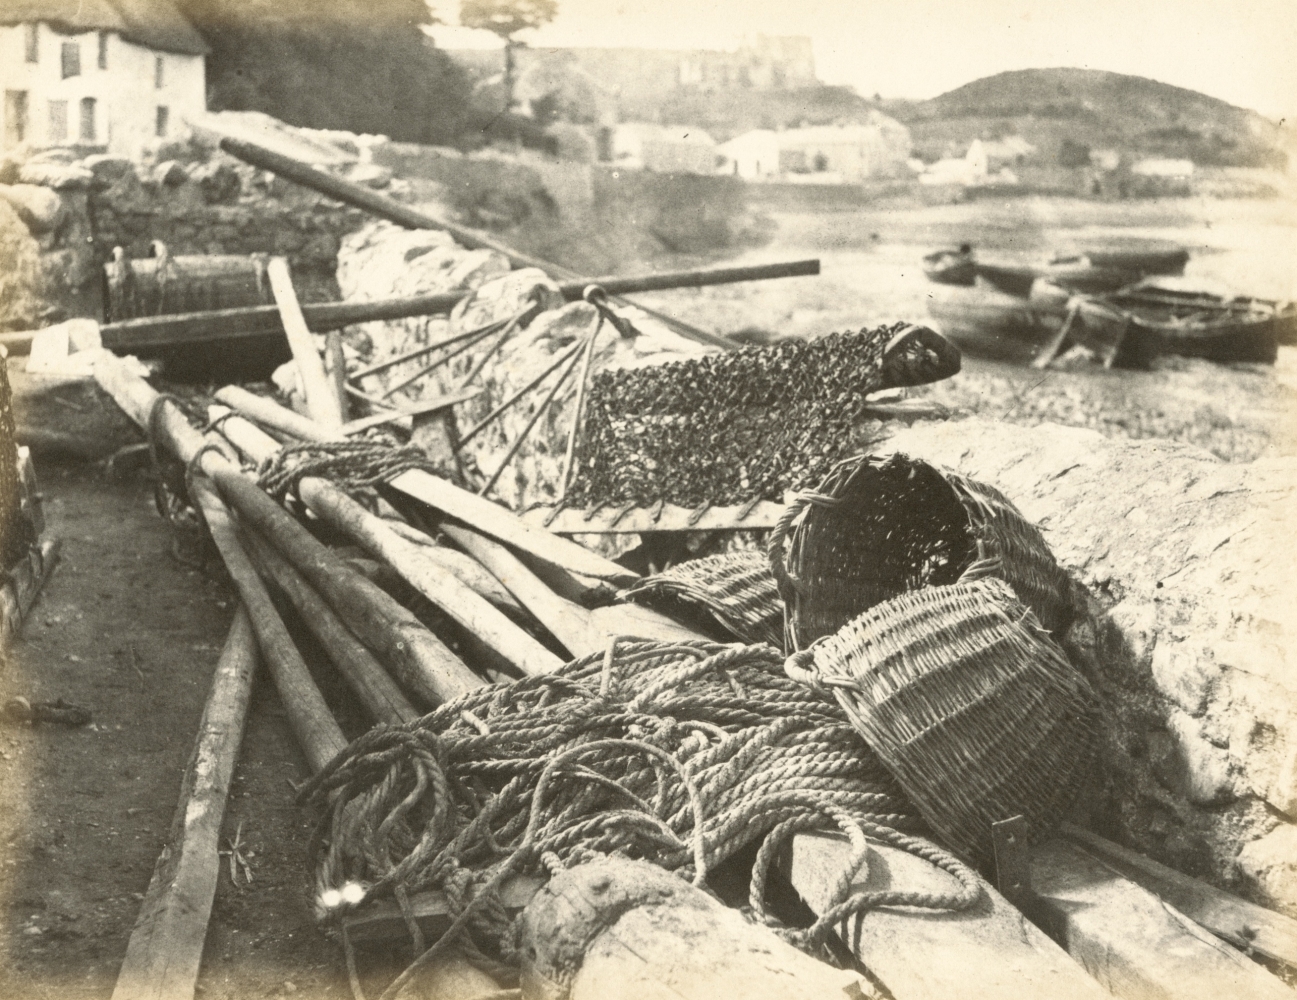 Hugh OWEN (English, 1808-1897) Dredges and baskets at Oystermouth, The Gower Albumen print, 1860s-1870s, from a paper negative, before 1855 17.3 x 22.4 cm mounted on 26.0 x 28.3 cm album sheet Numbered "71" in pencil on mount